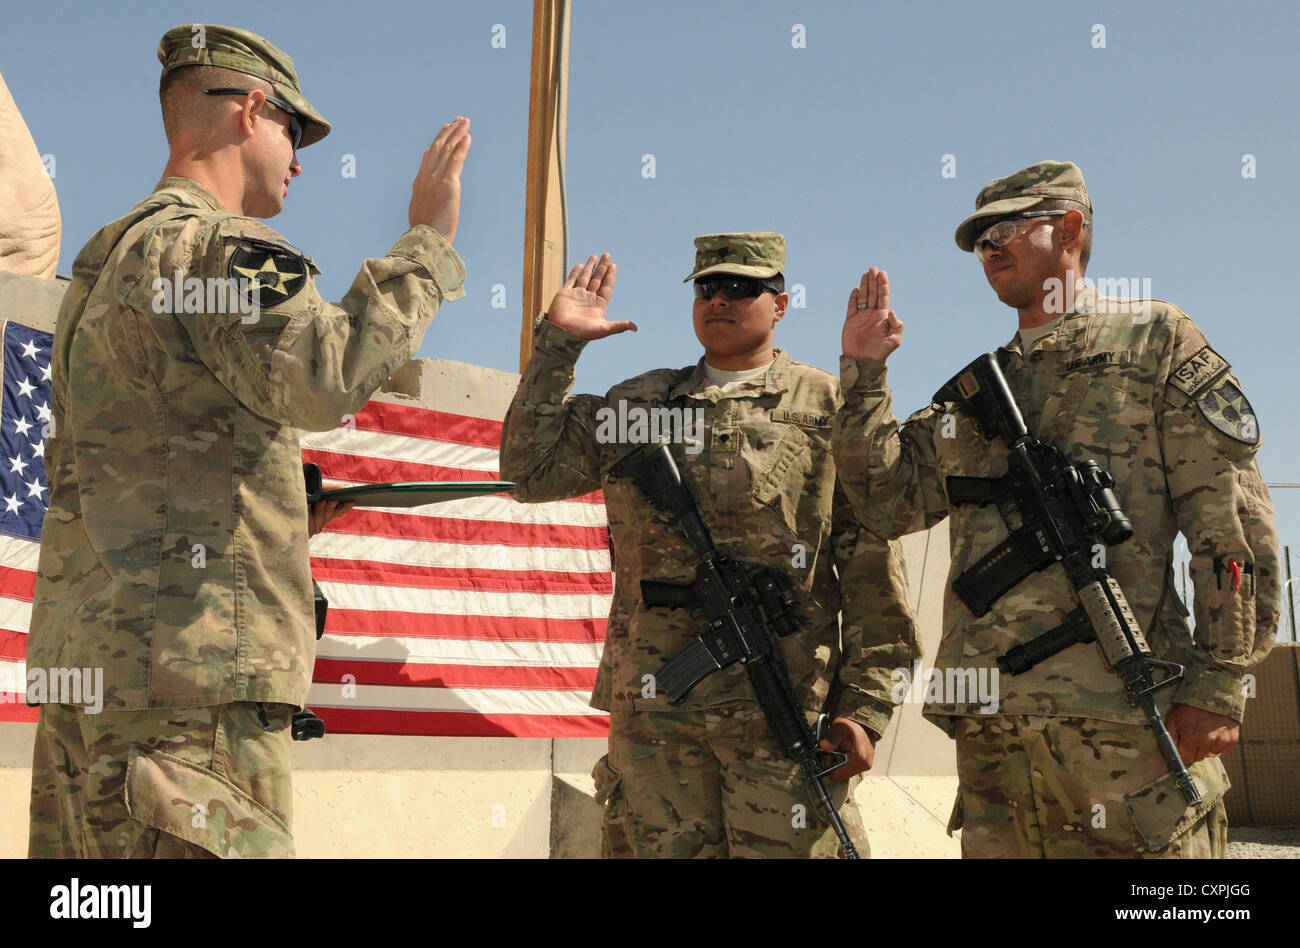 From right, Staff Sgt. Josuel Cruz, of Orlando, Fla., and Spc. Joseph Tauiliili, from the village of Vailoa, American Samoa, reenlist in the Army during a ceremony at Forward Operating Base Spin Boldak, Afghanistan, Oct. 7, 2012. The soldiers are with the 2nd Infantry Division's 5th Battalion, 20th Infantry Regiment. The 5-20th Infantry is part of the 3rd Stryker Brigade Combat Team from Joint Base Lewis-McChord, Wash. Stock Photo